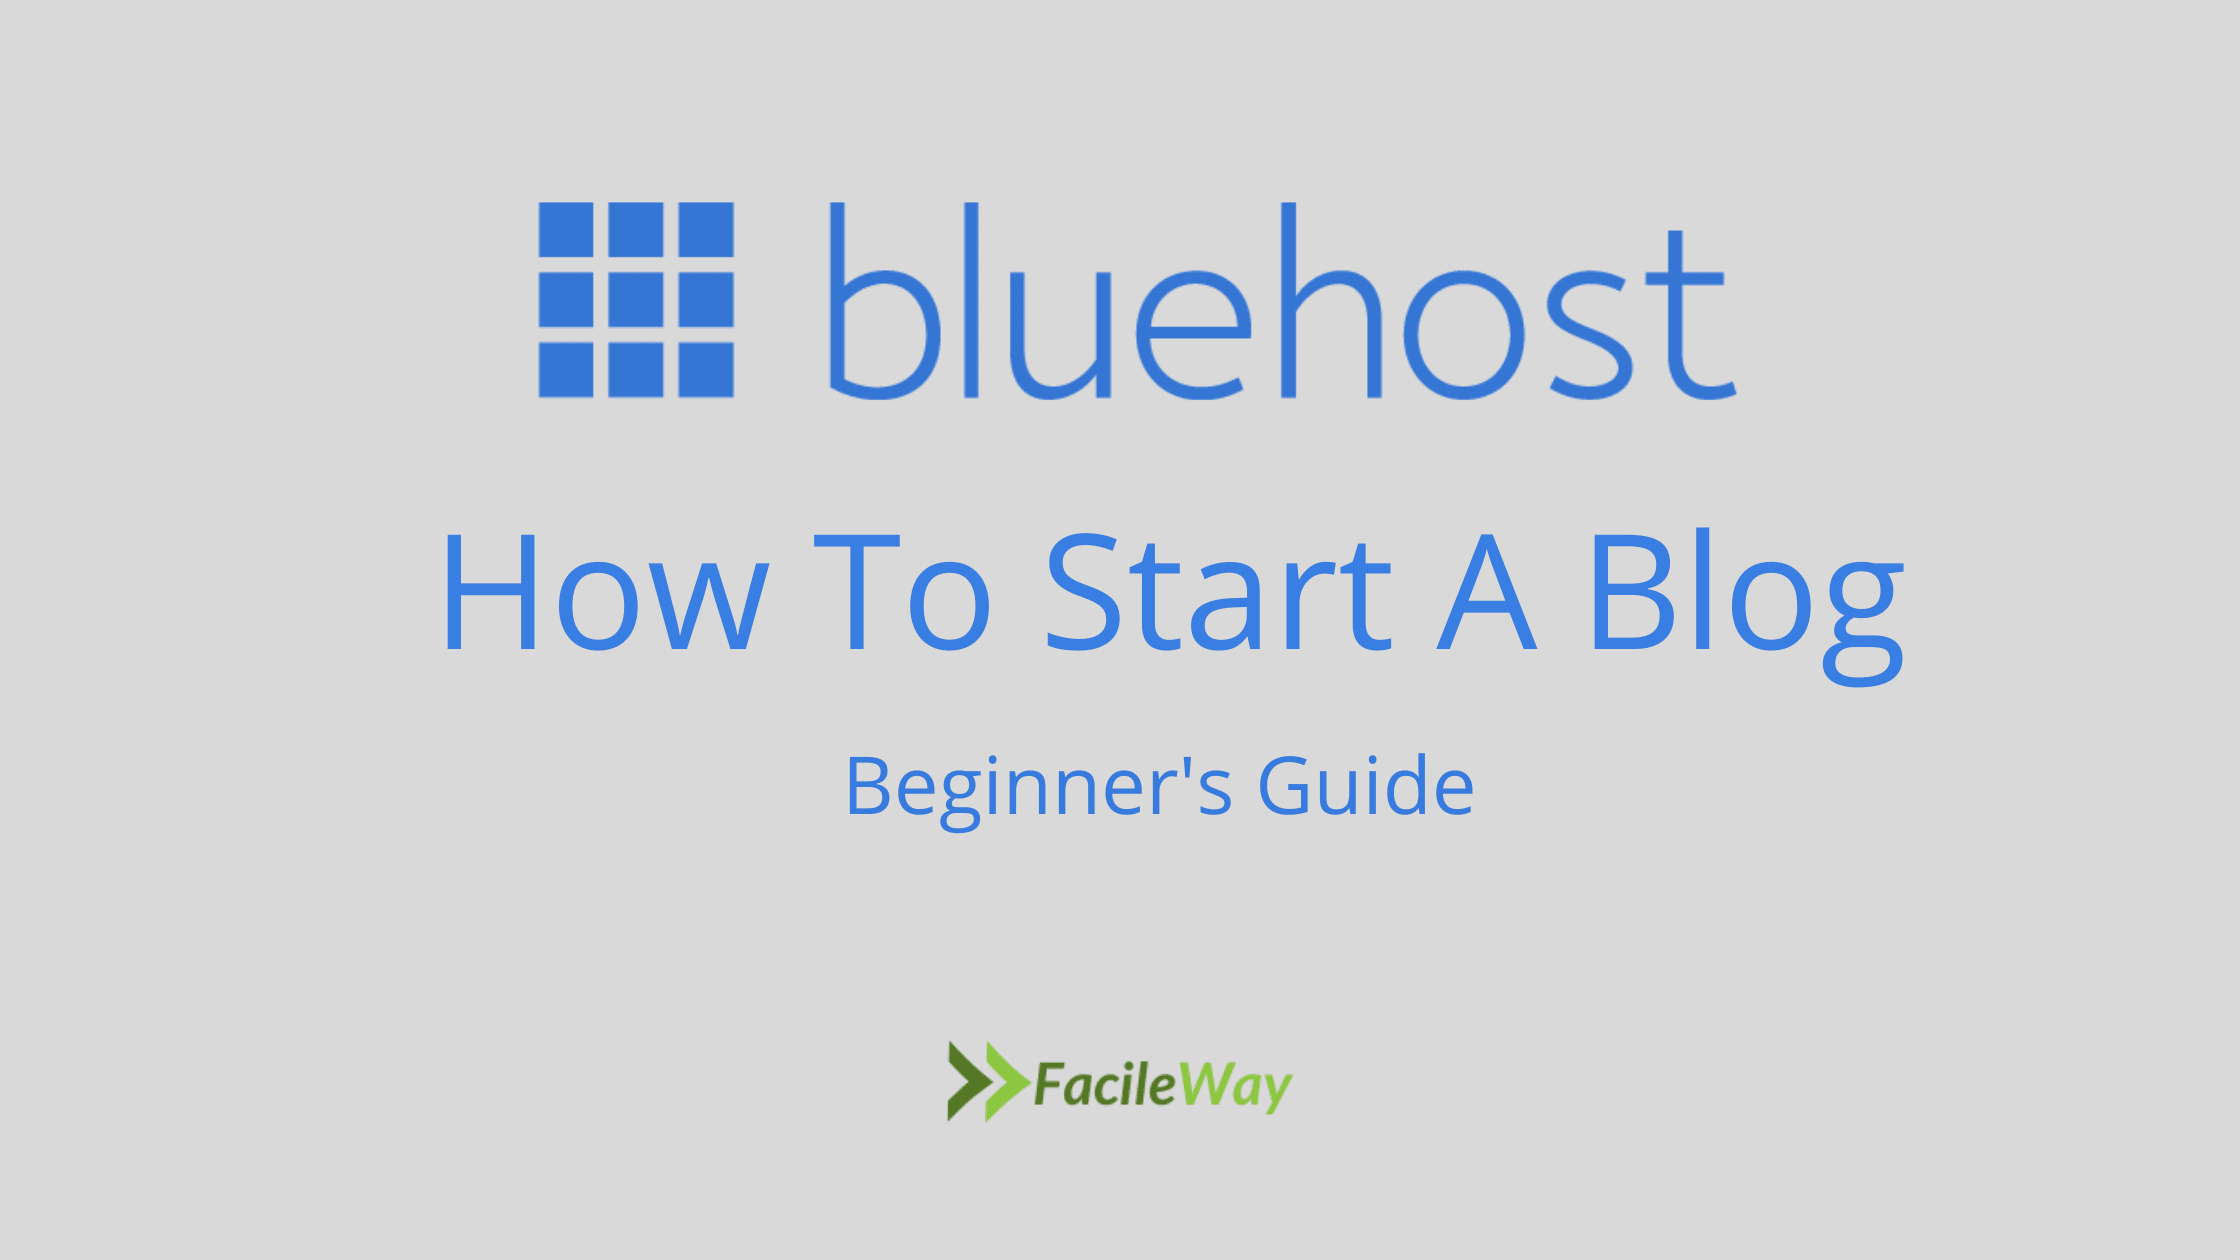 How to start blogging with bluehost